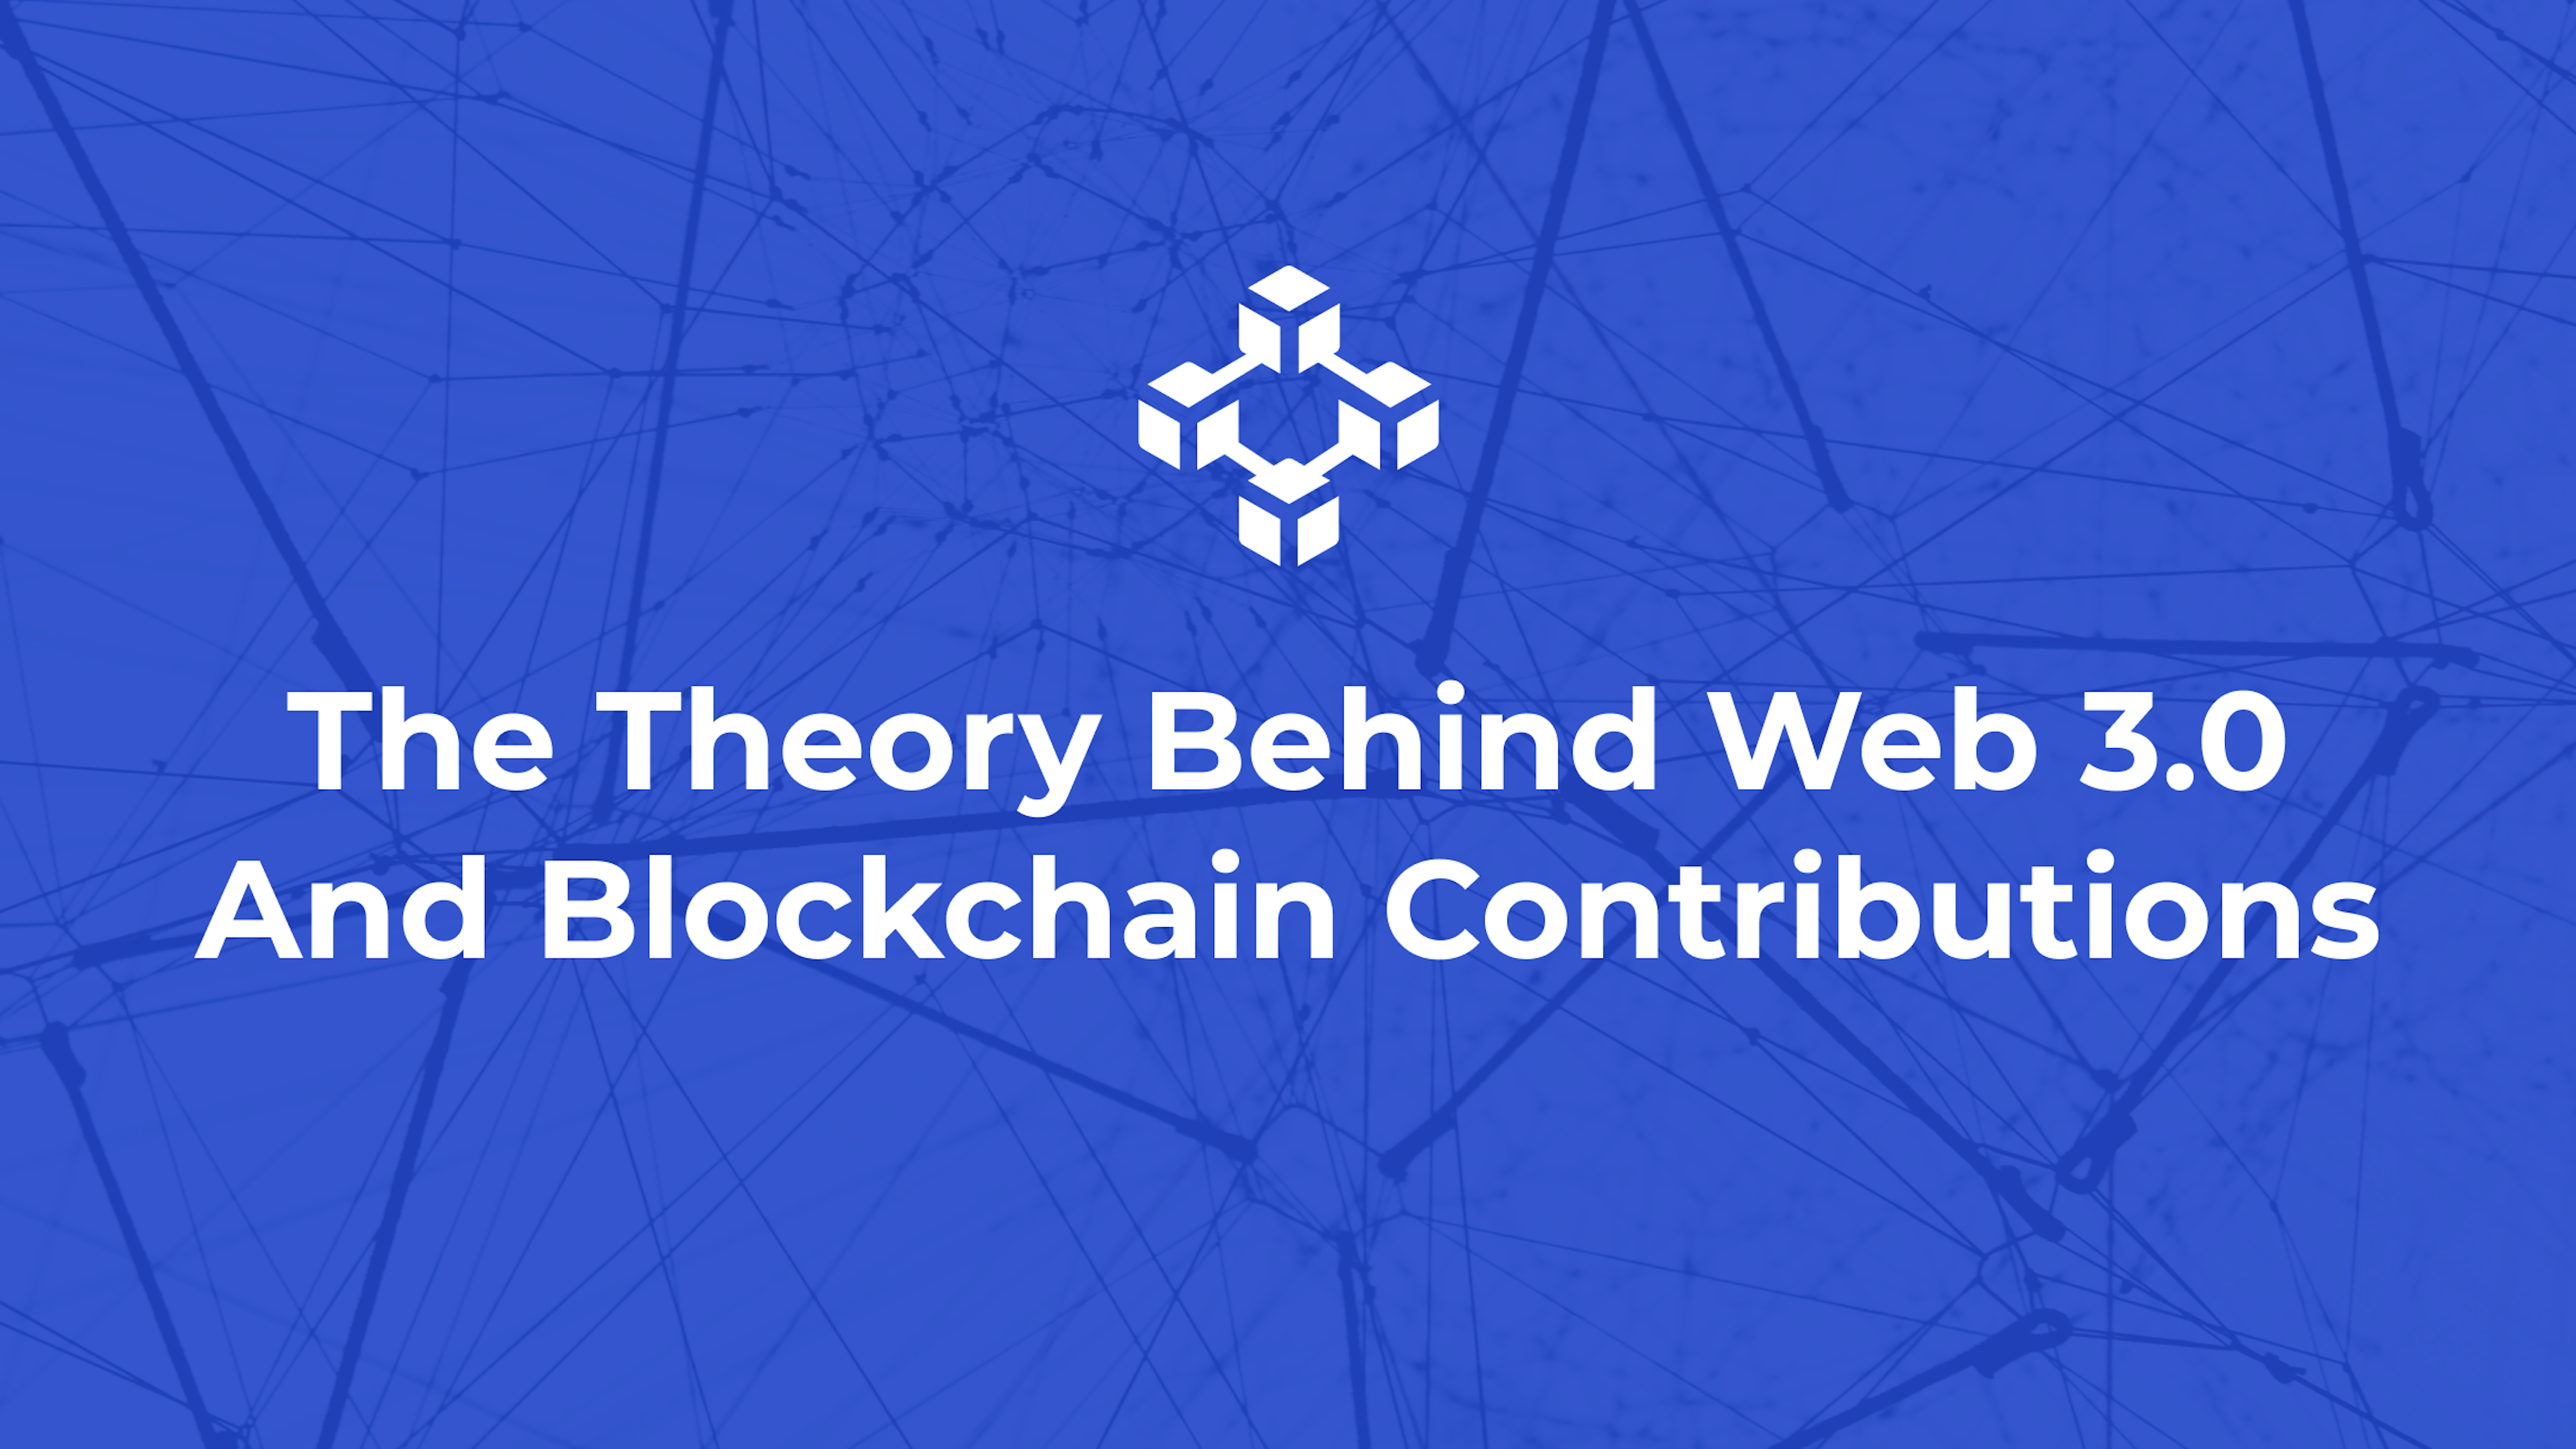 The Theory Behind Web 3.0 (Semantic Web) And Blockchain Contributions